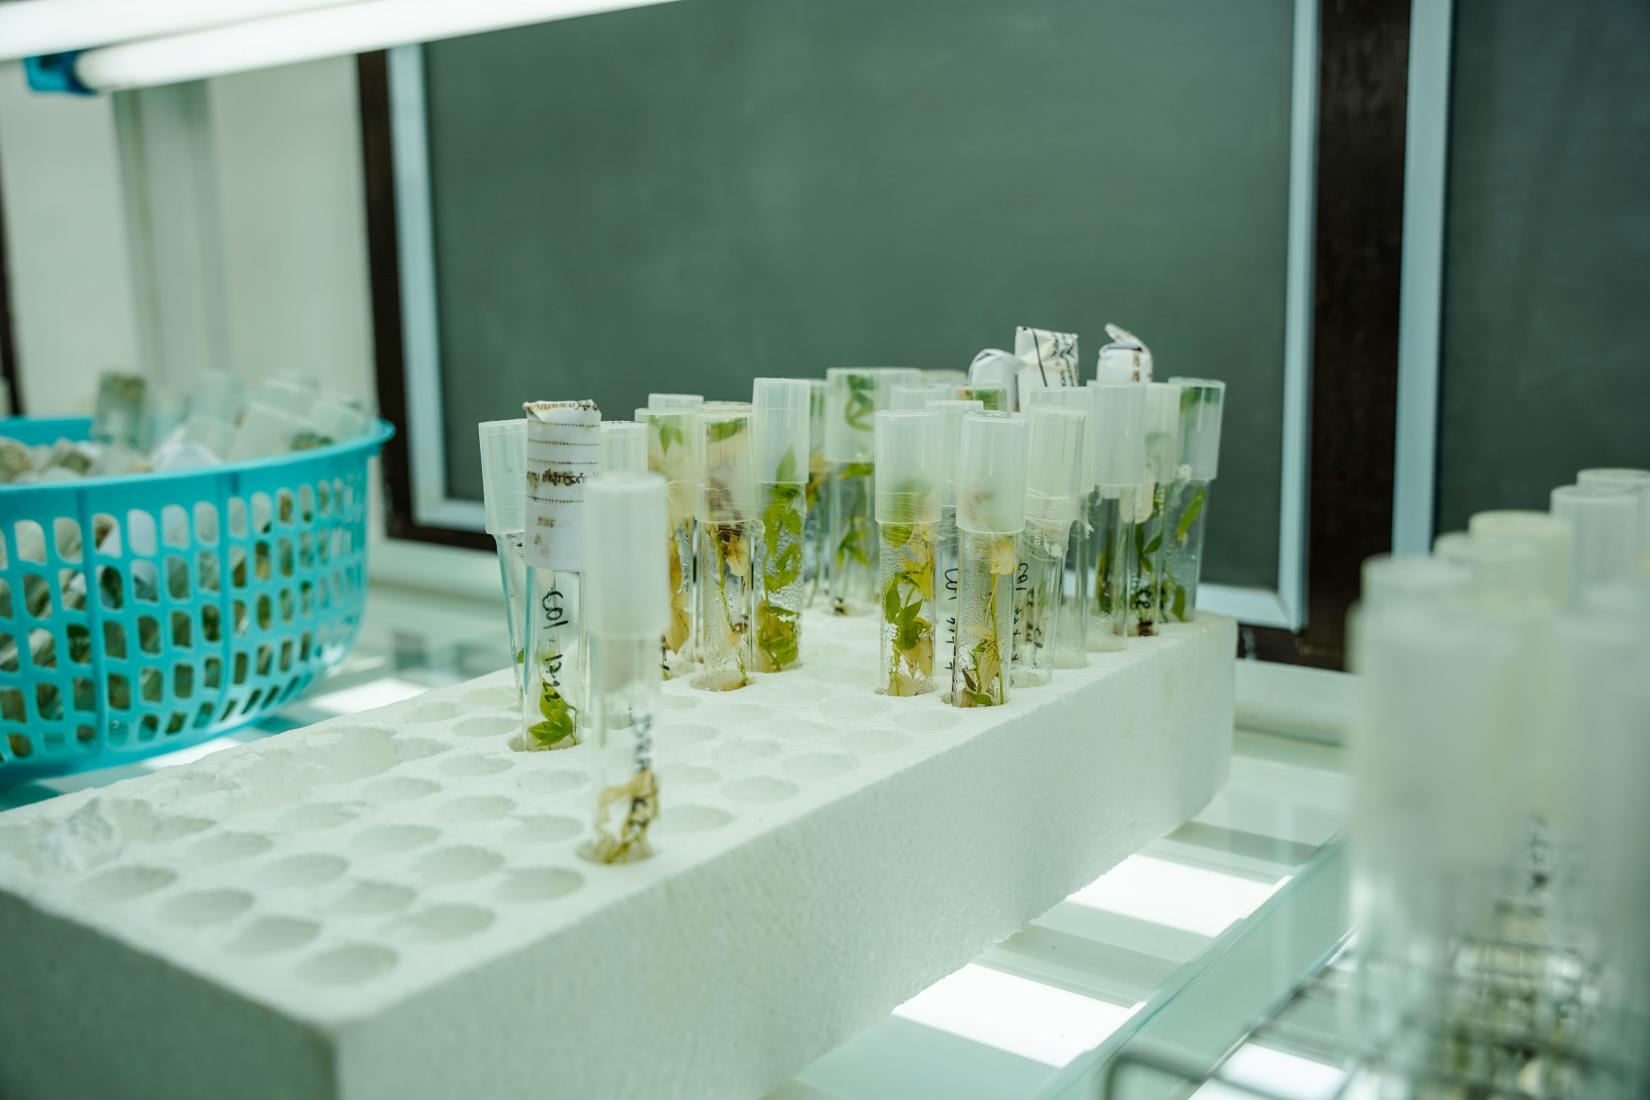 A tray of test tubes containing plantlets